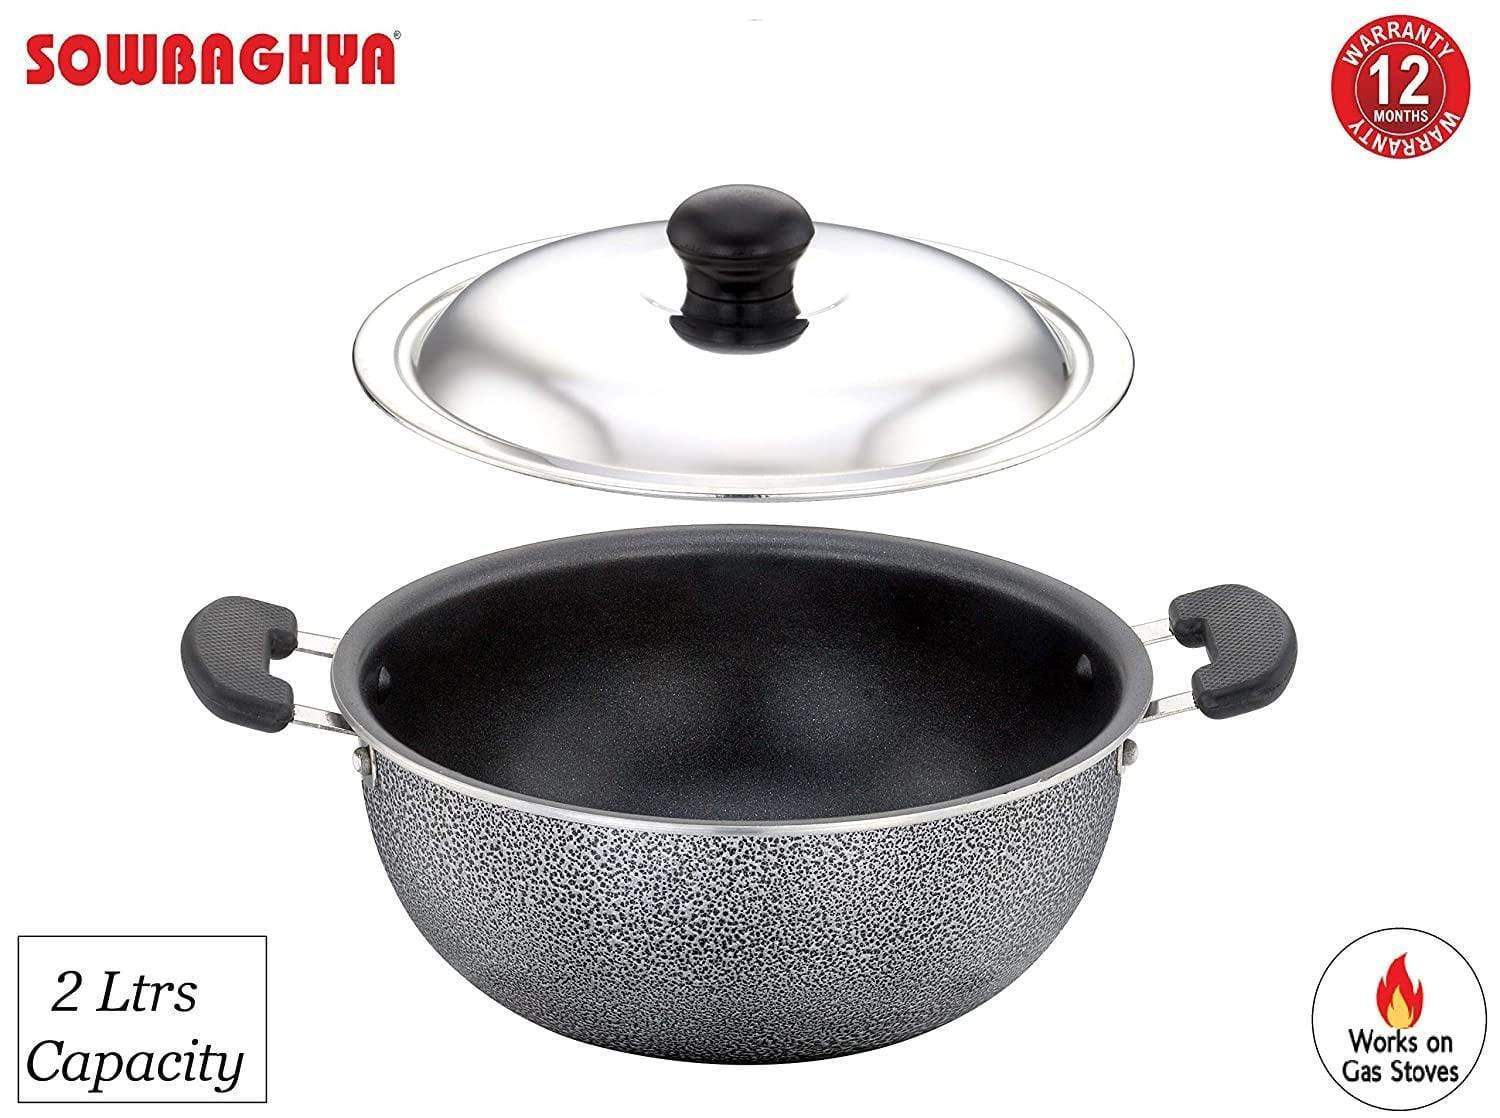 SOWBAGHYA Aluminium Non Stick Deep Kadai with Stainless Steel Lid (2 L, Grey and Black)-Home & Kitchen Appliances-dealsplant